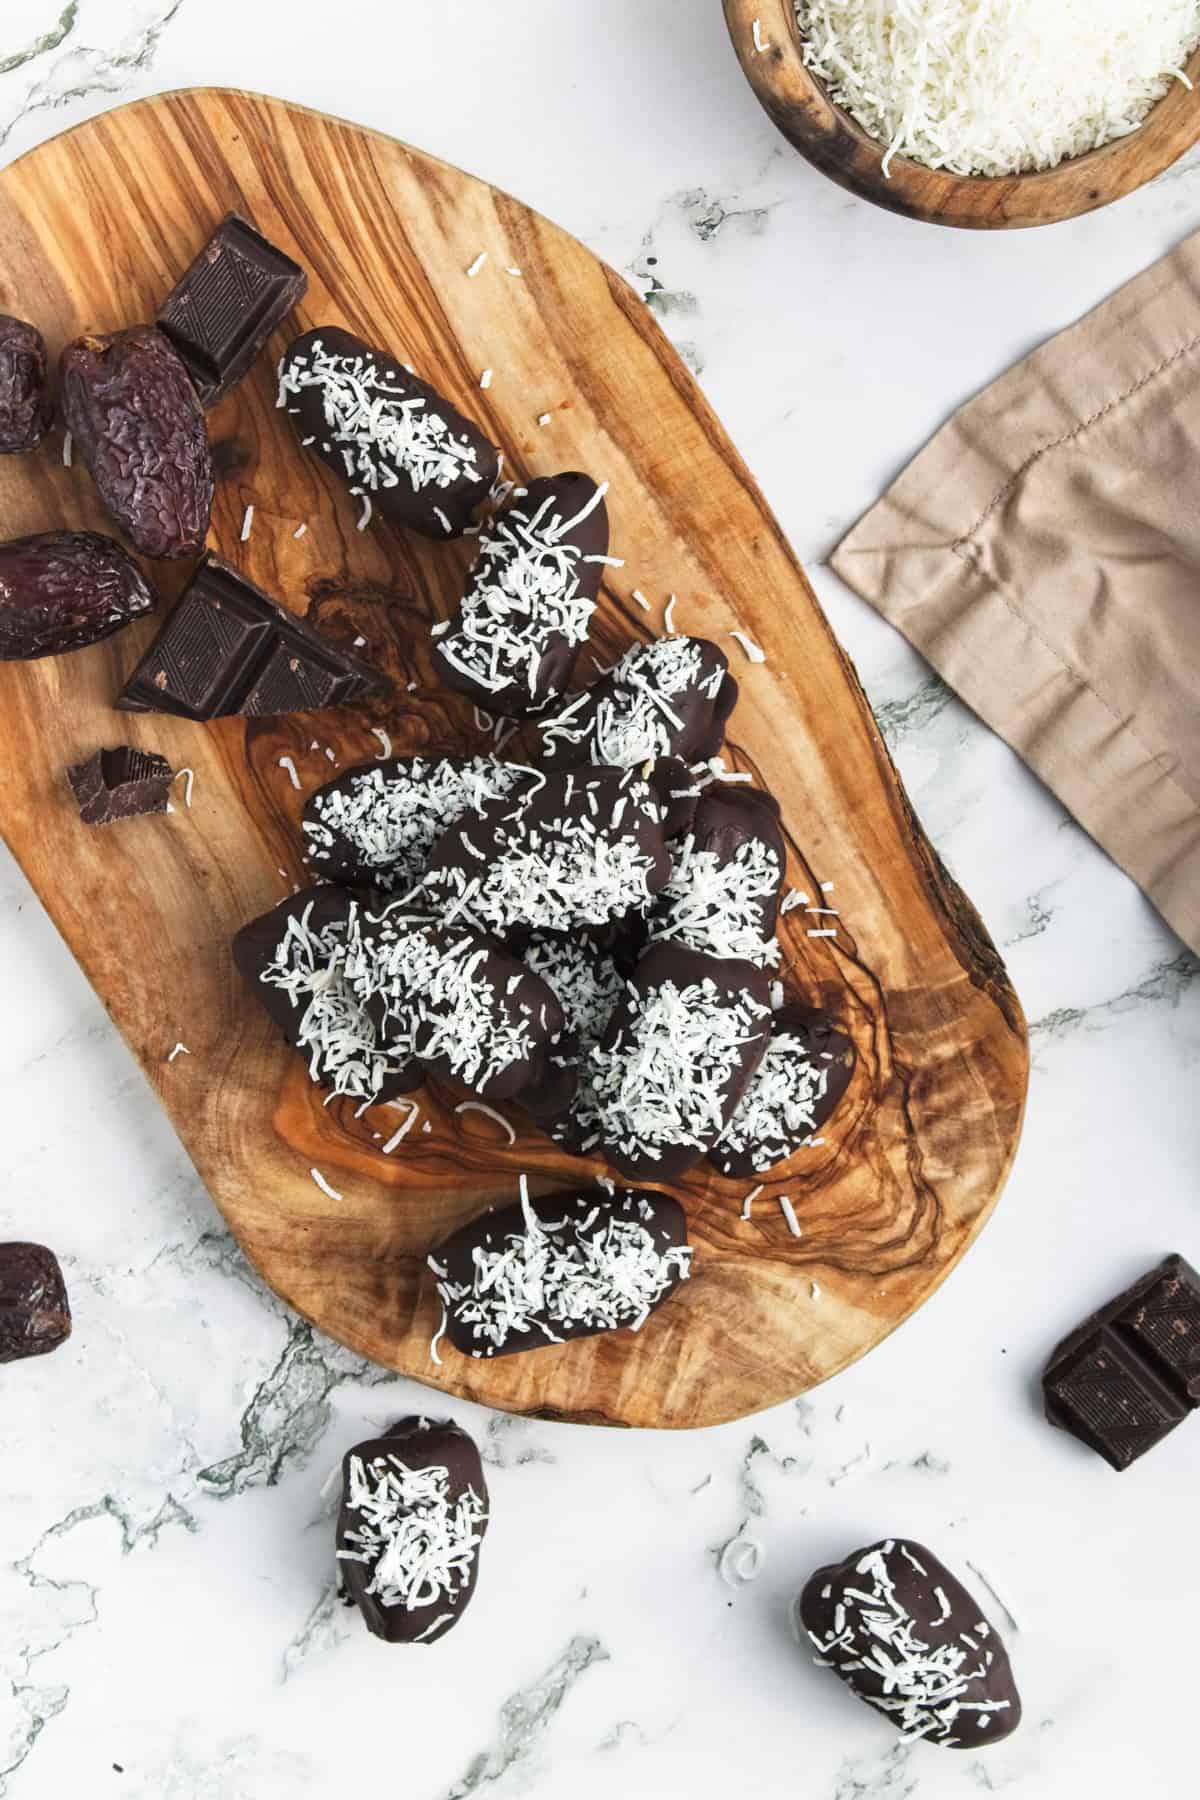 A pile of chocolate covered dates on a wooden board.